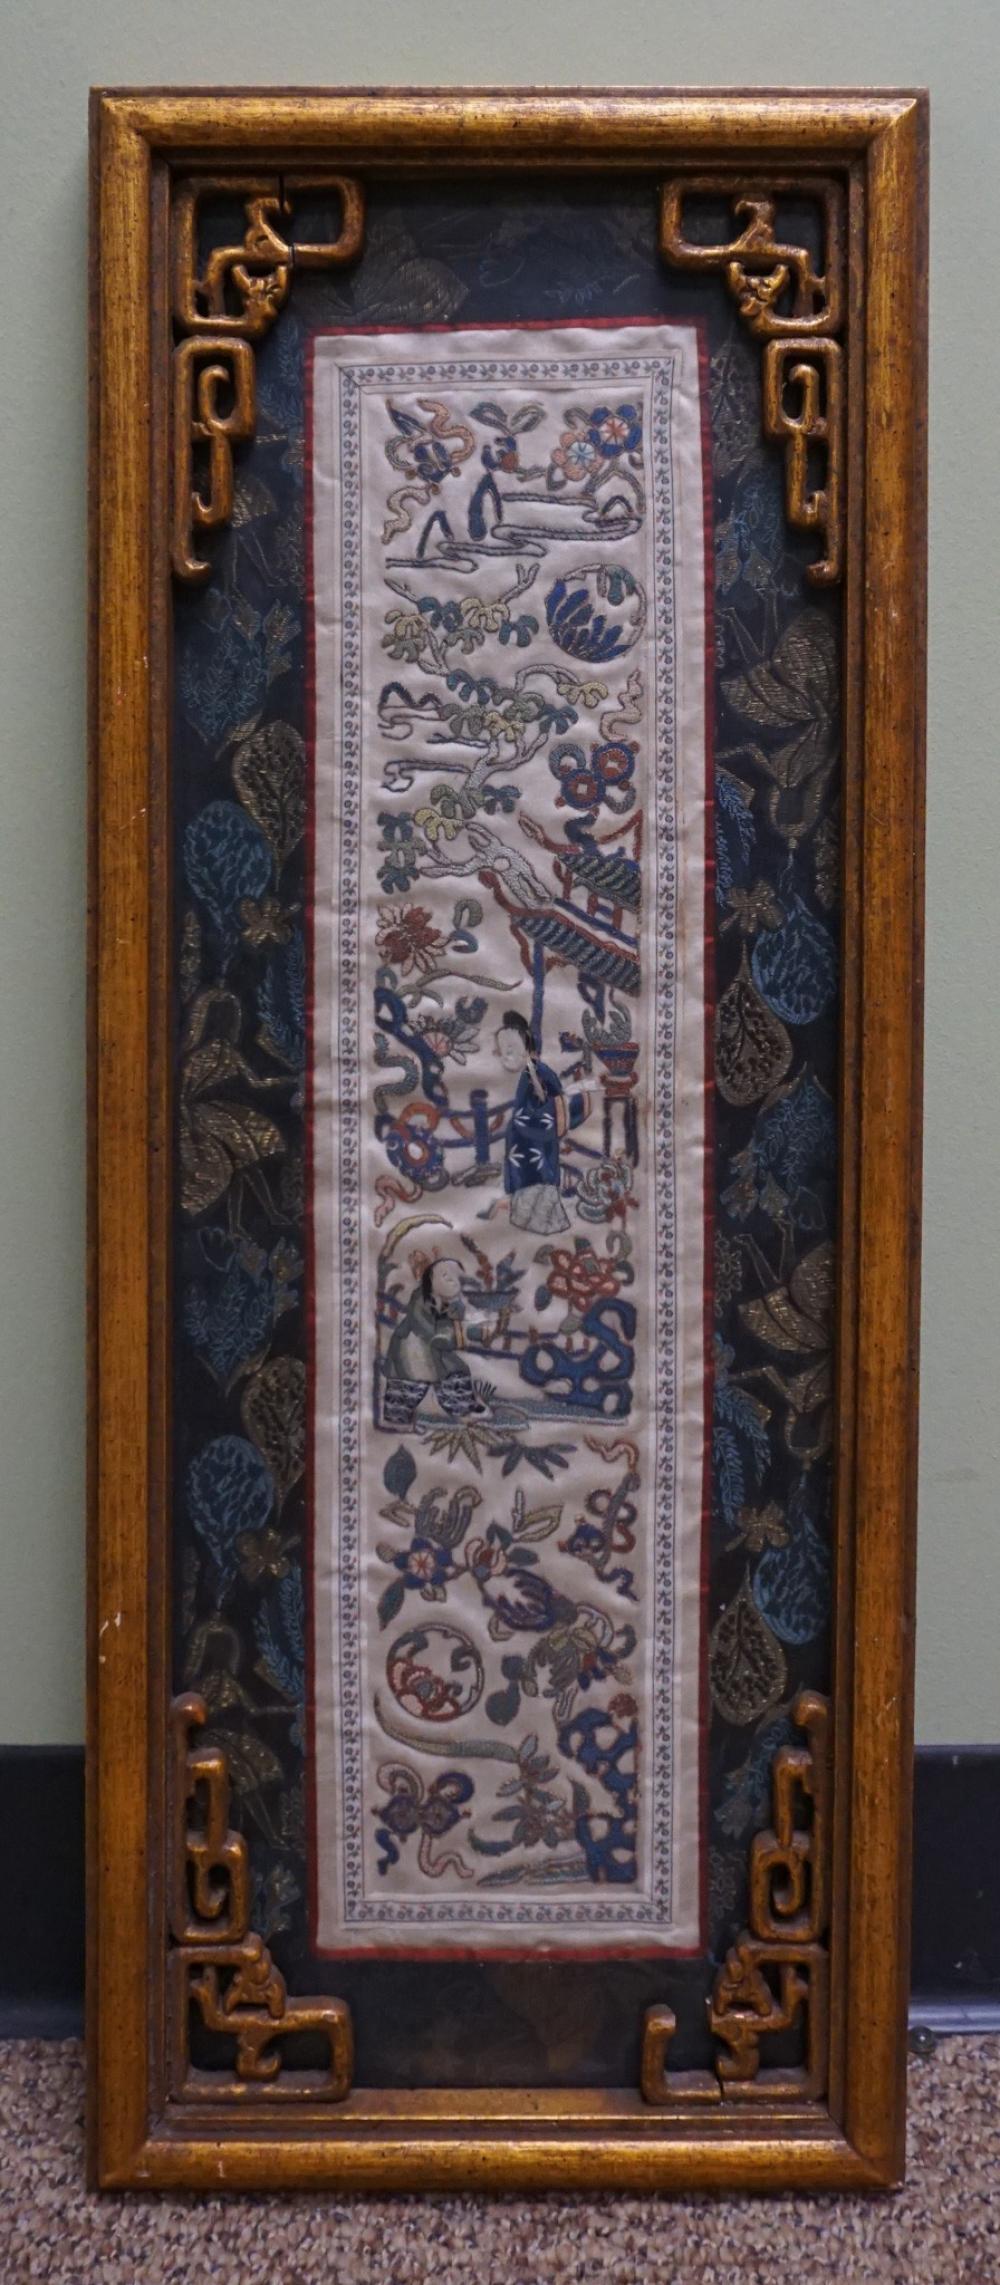 CHINESE SILK EMBROIDERY IN GILT 2e5c56